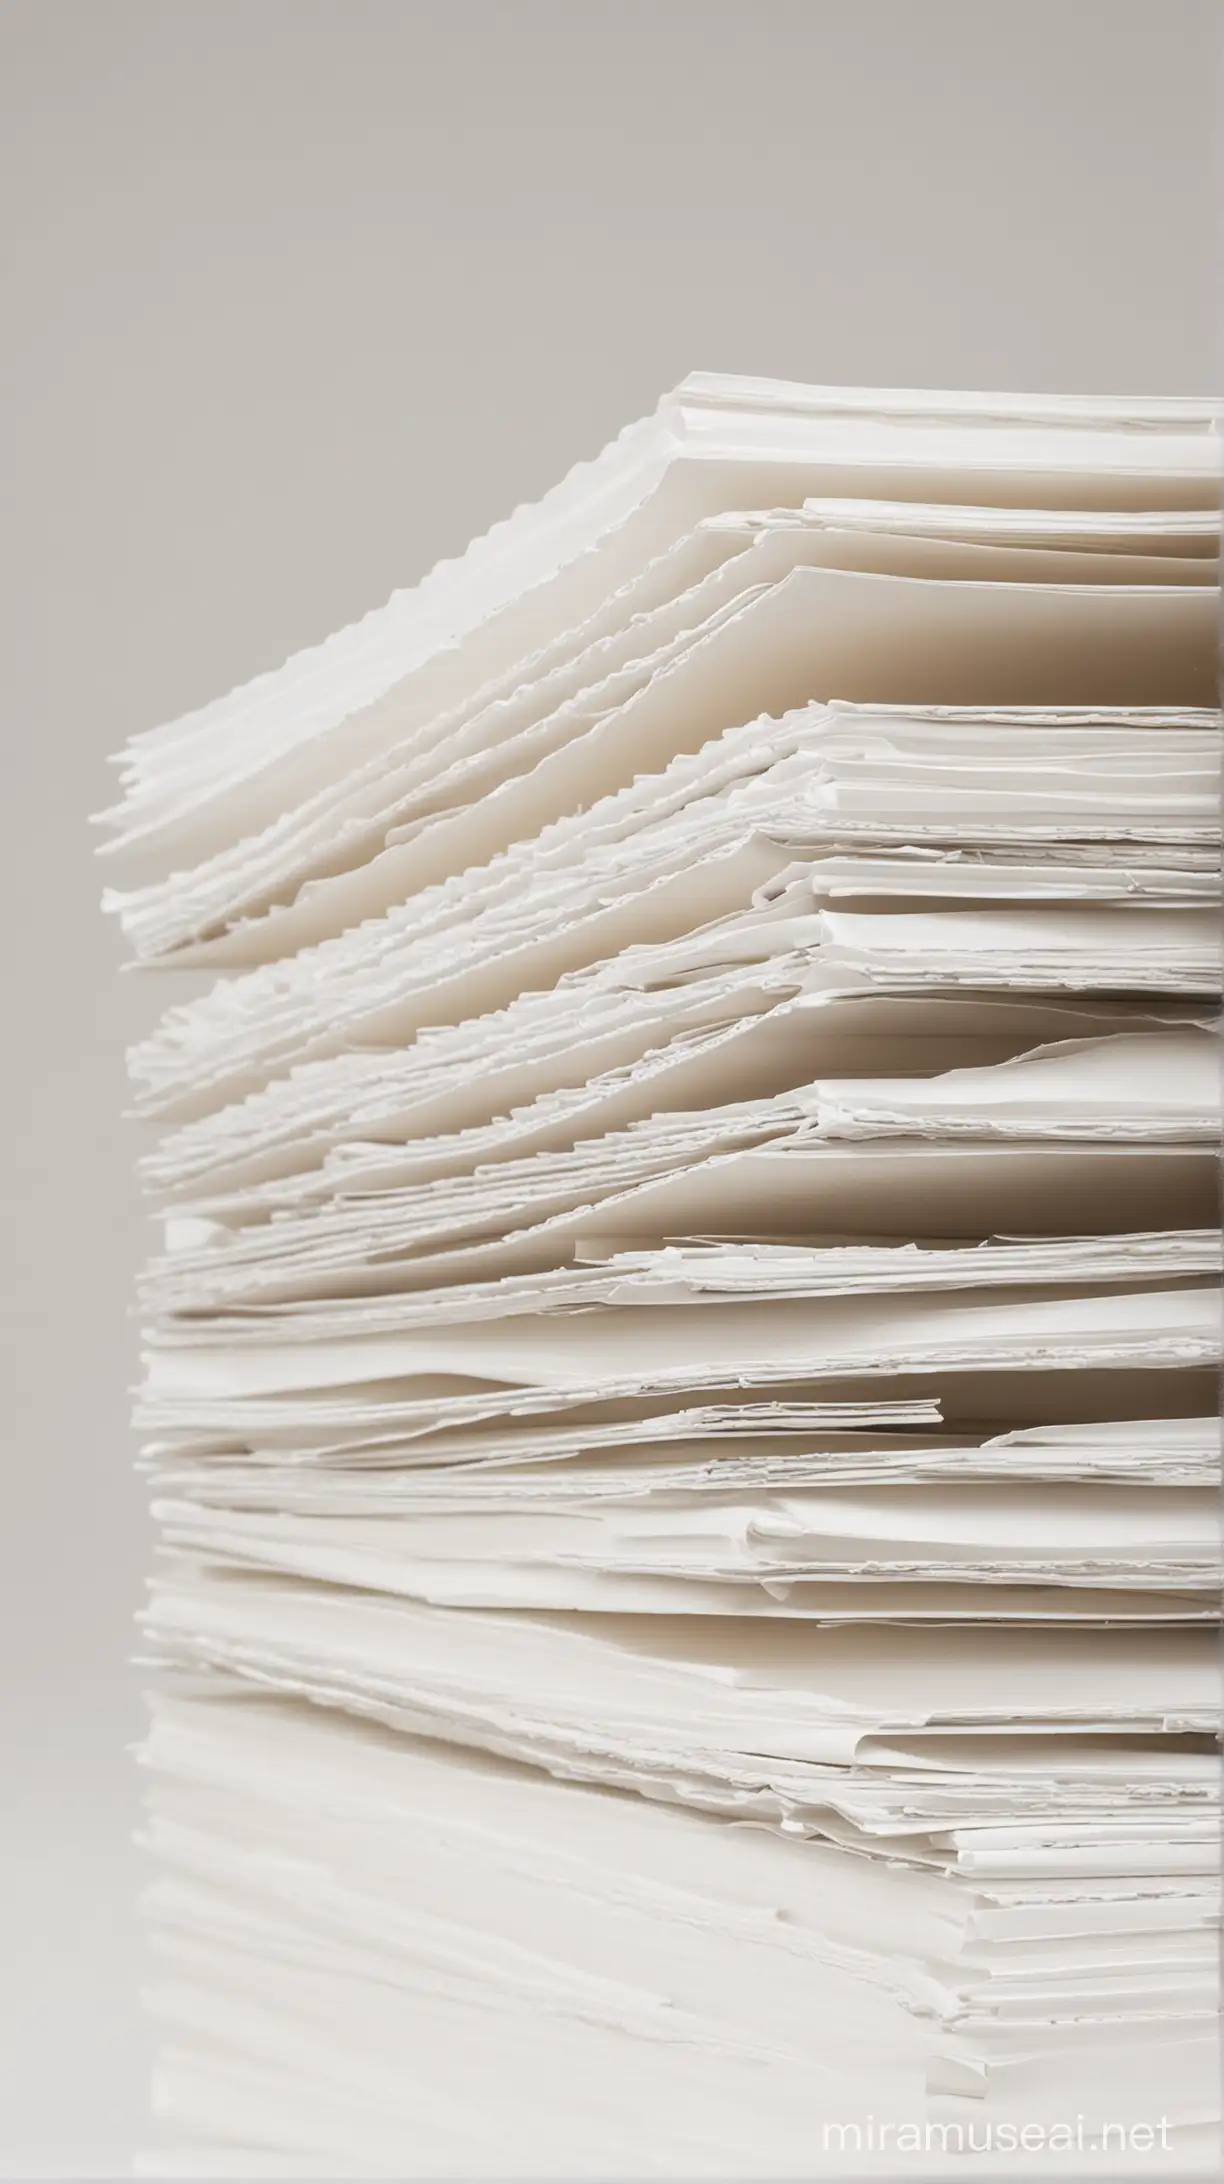 vertical stack of empty white binder folders, pale background